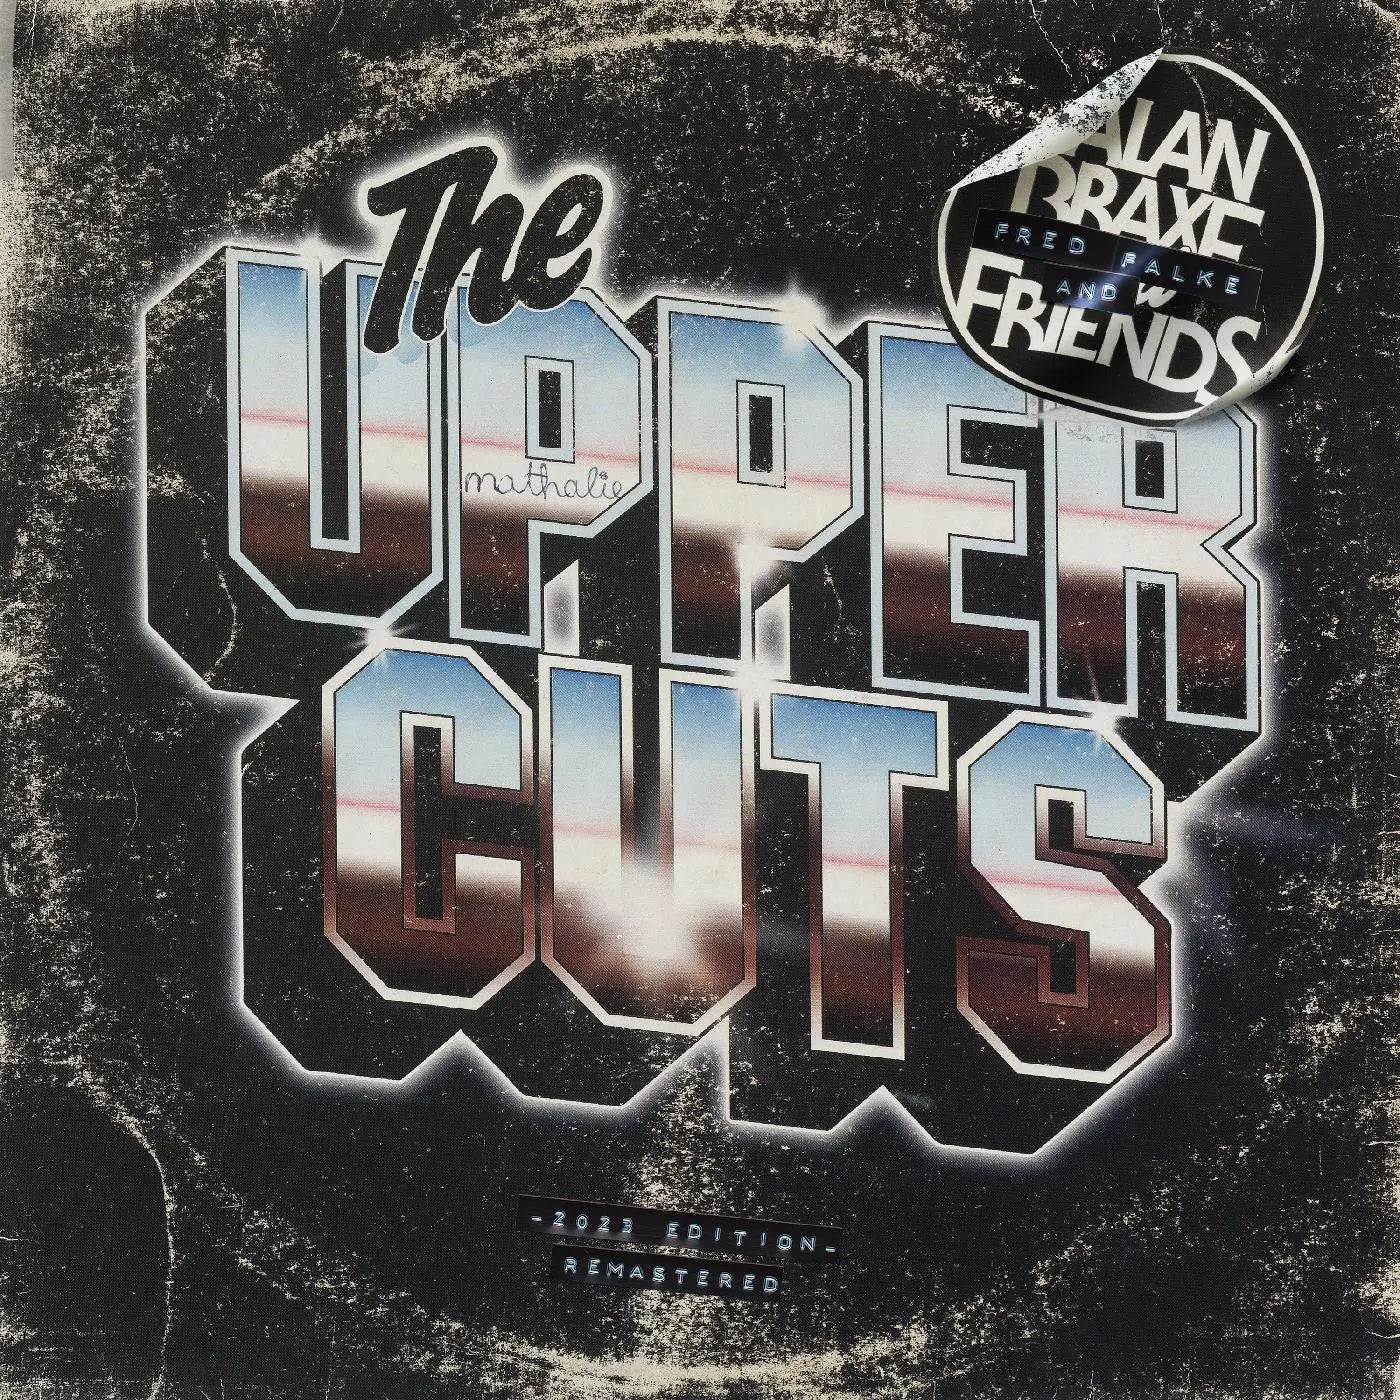 Alan Braxe, Fred Falke & Friends - The Upper Cuts (2023 Edition) [2LP Rose Pink and Baby Blue Vinyl]